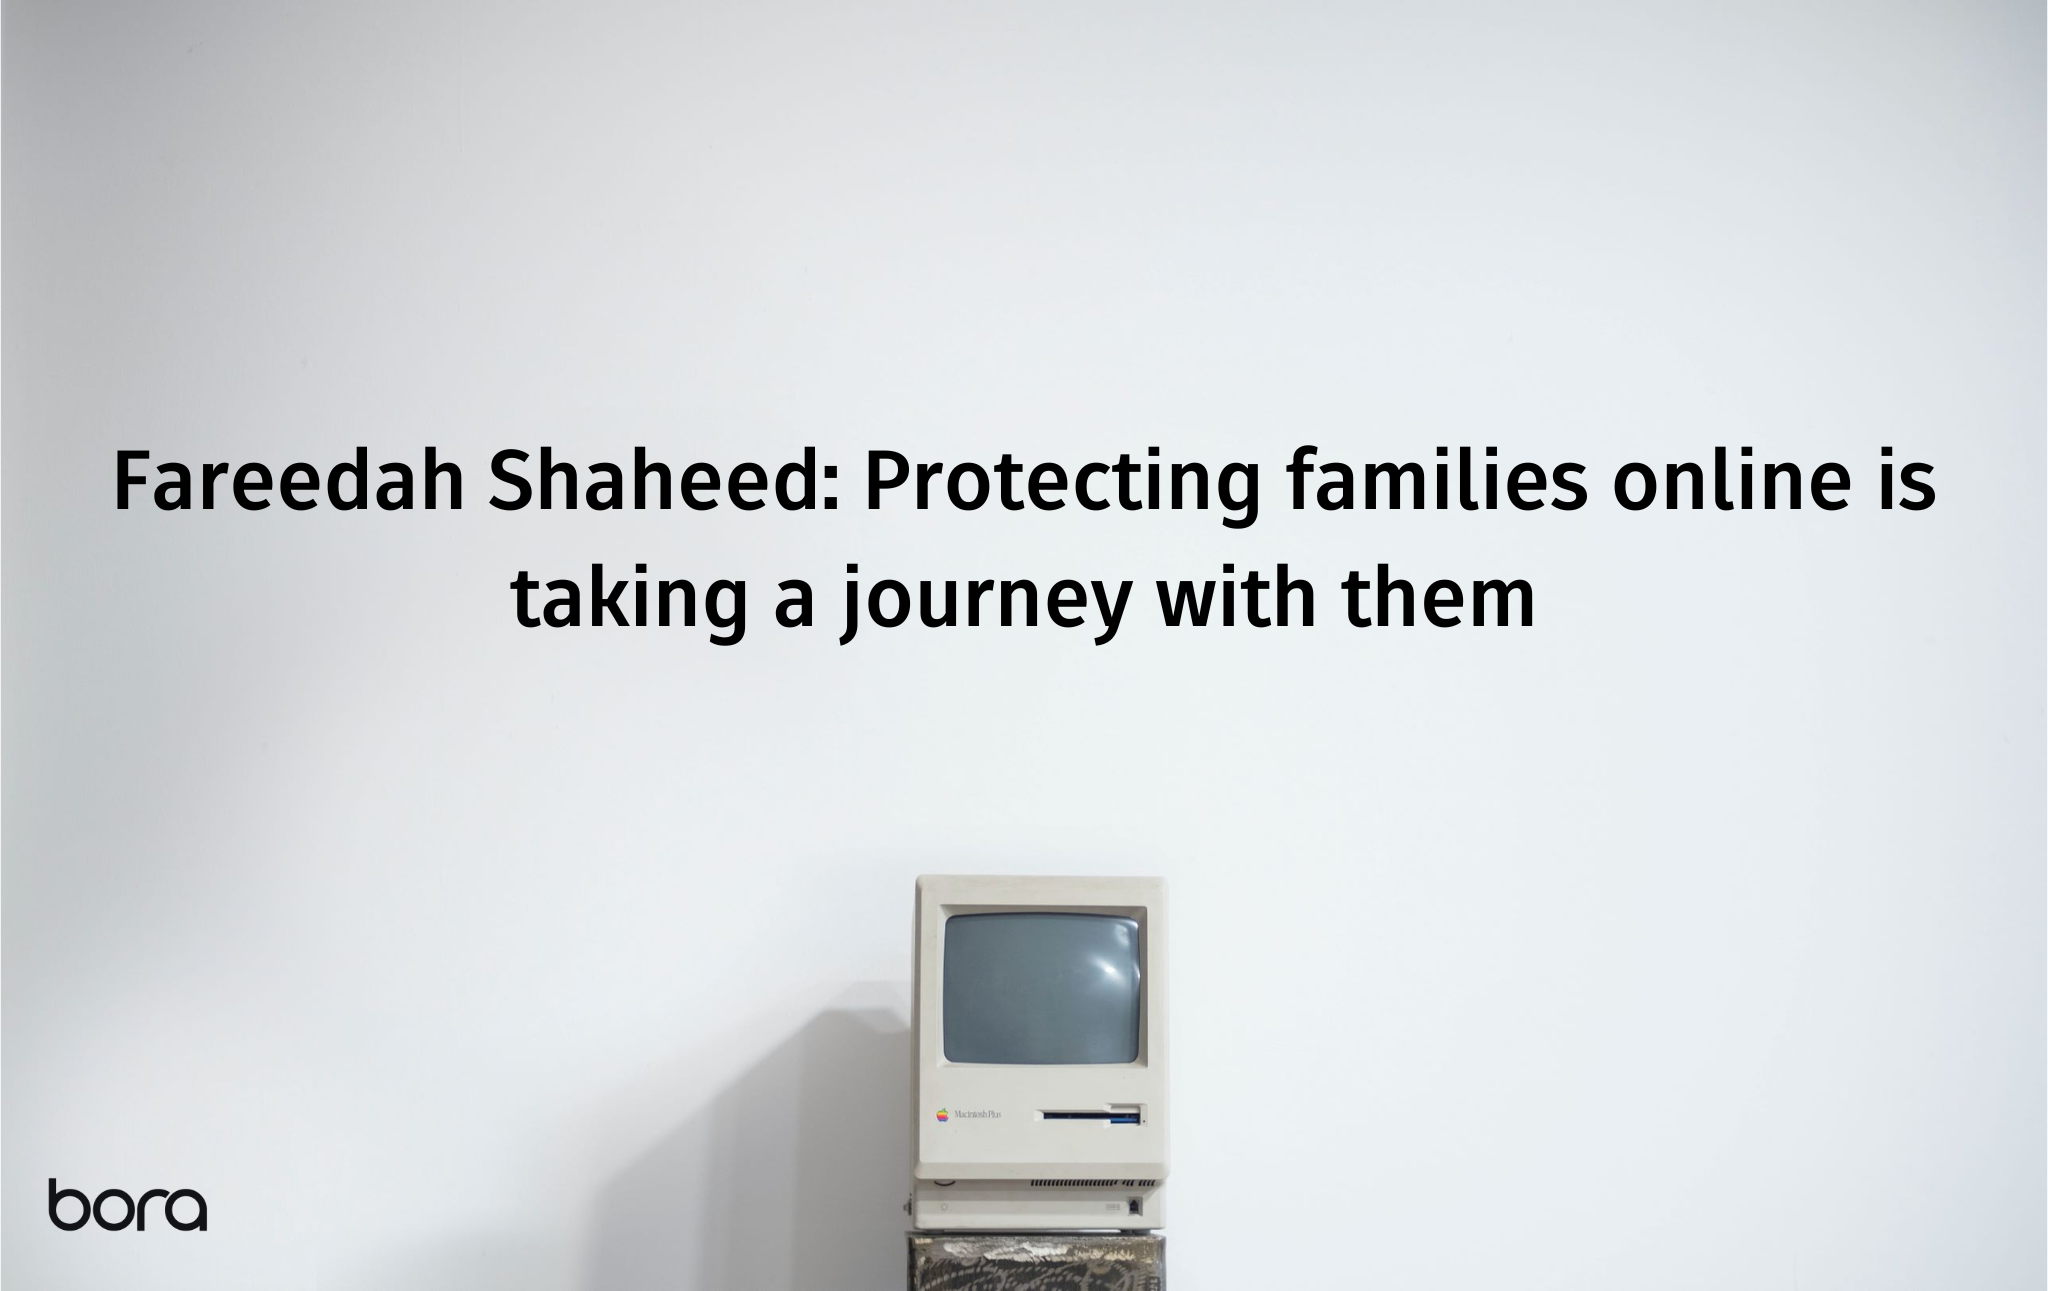 Fareedah Shaheed: Protecting families online is taking a journey with them